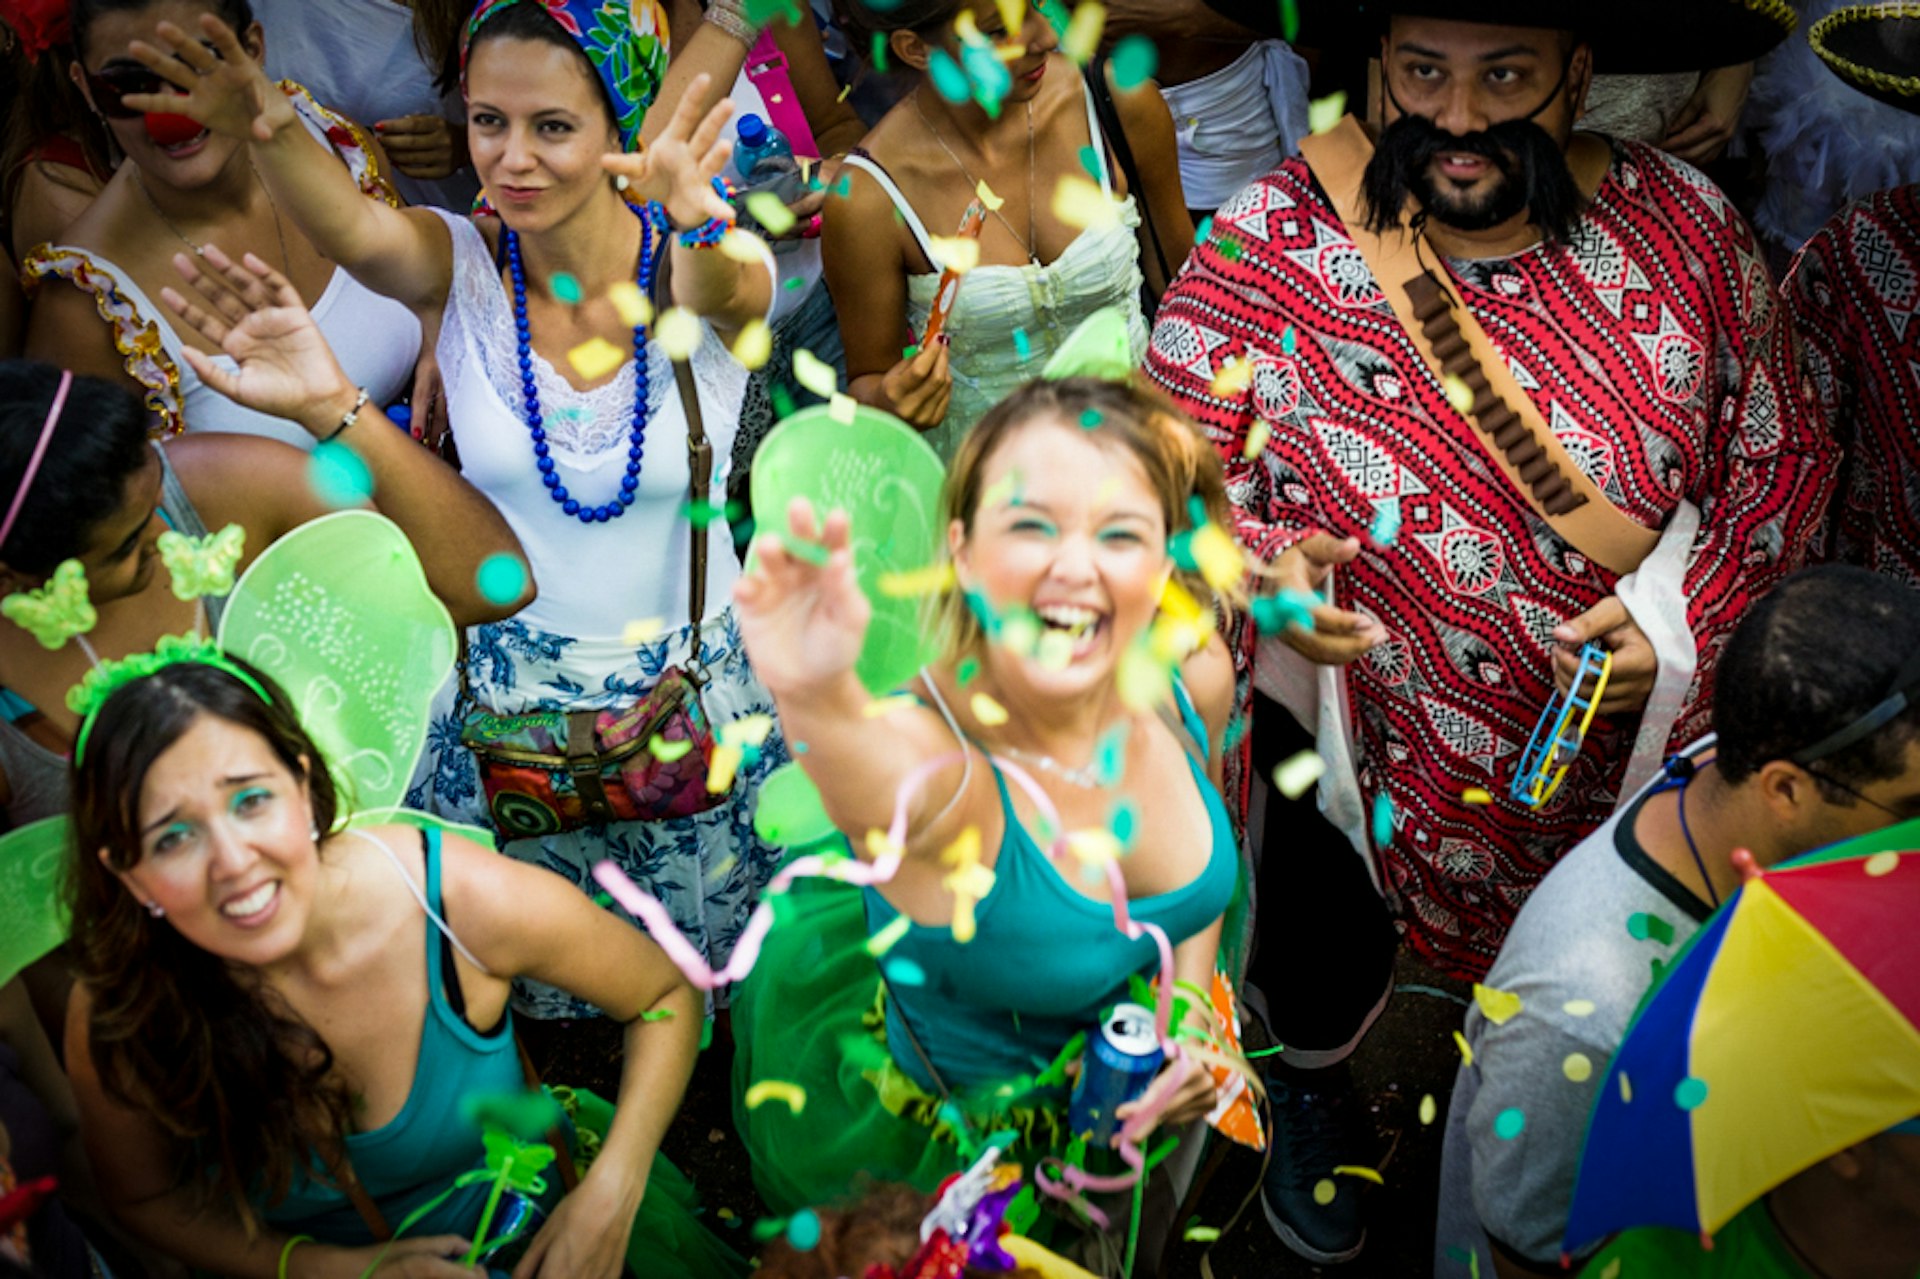 Revelers get into the carnival atmosphere. Image by Teresa Geer / Lonely Planet